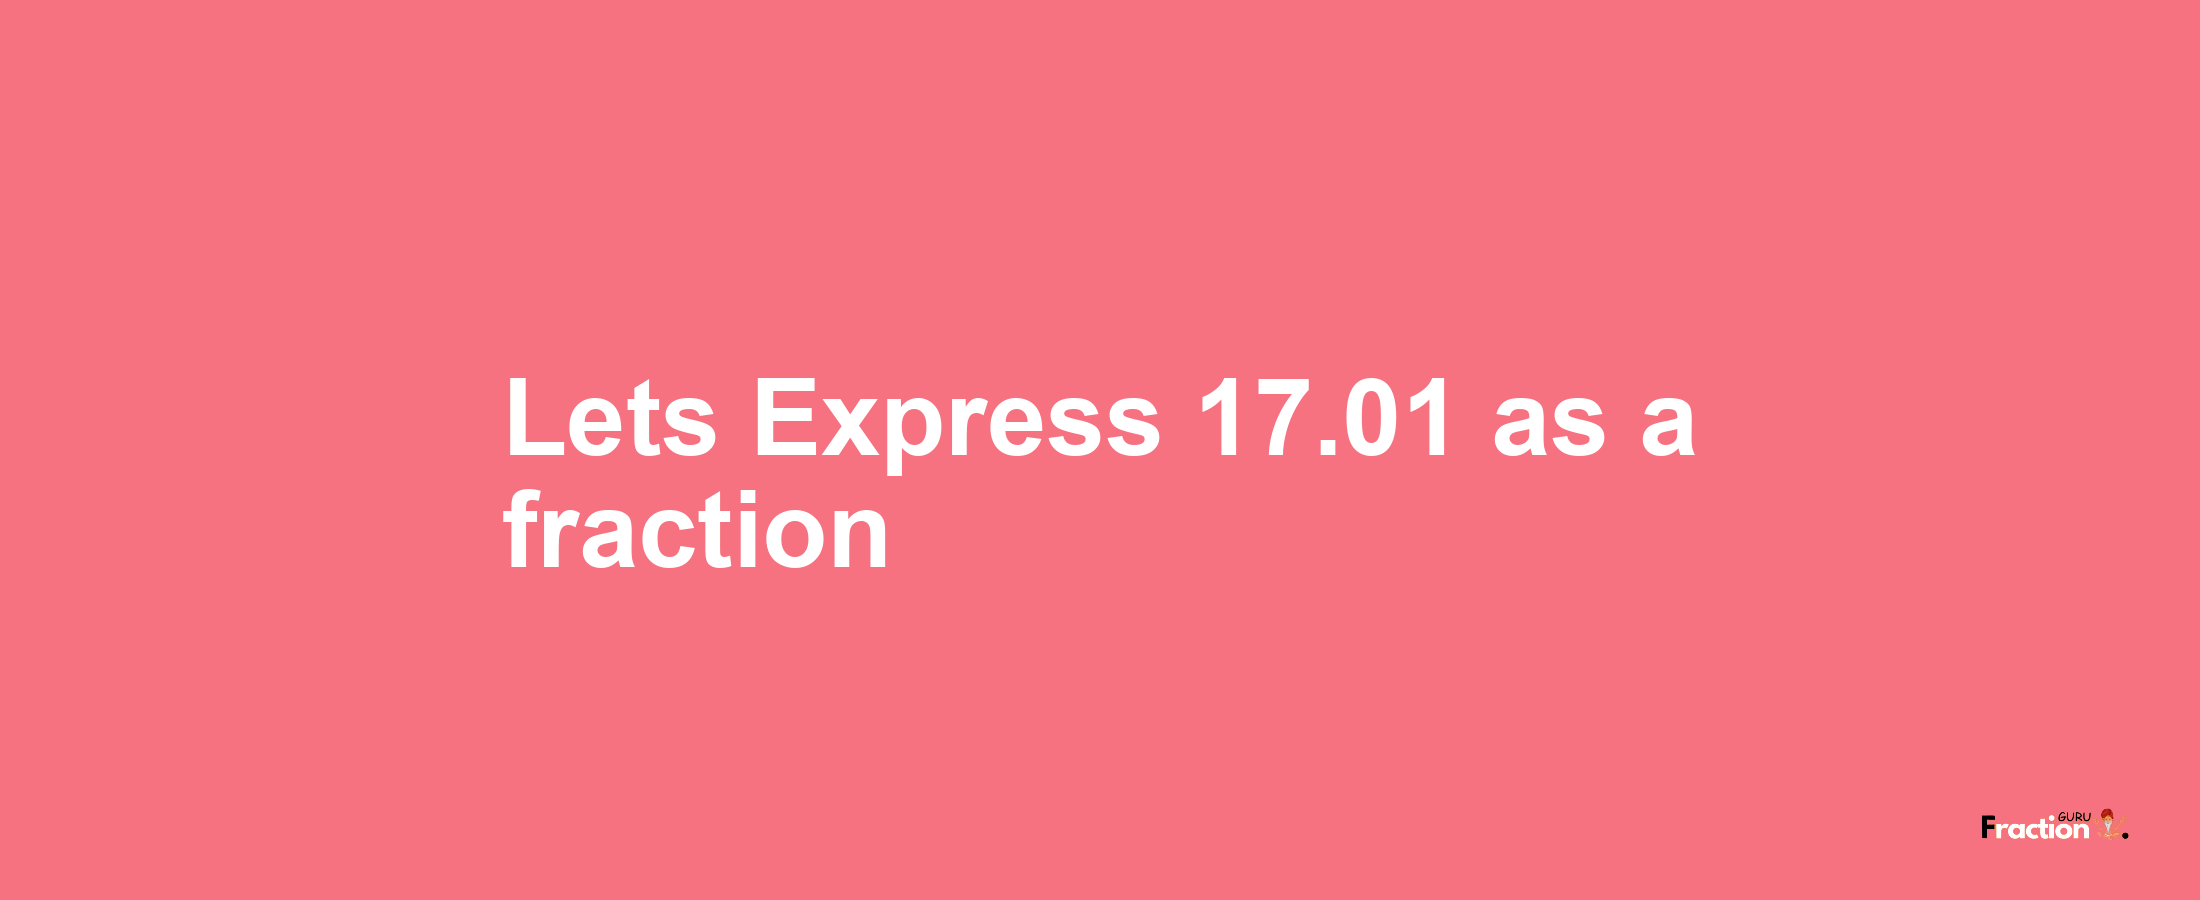 Lets Express 17.01 as afraction